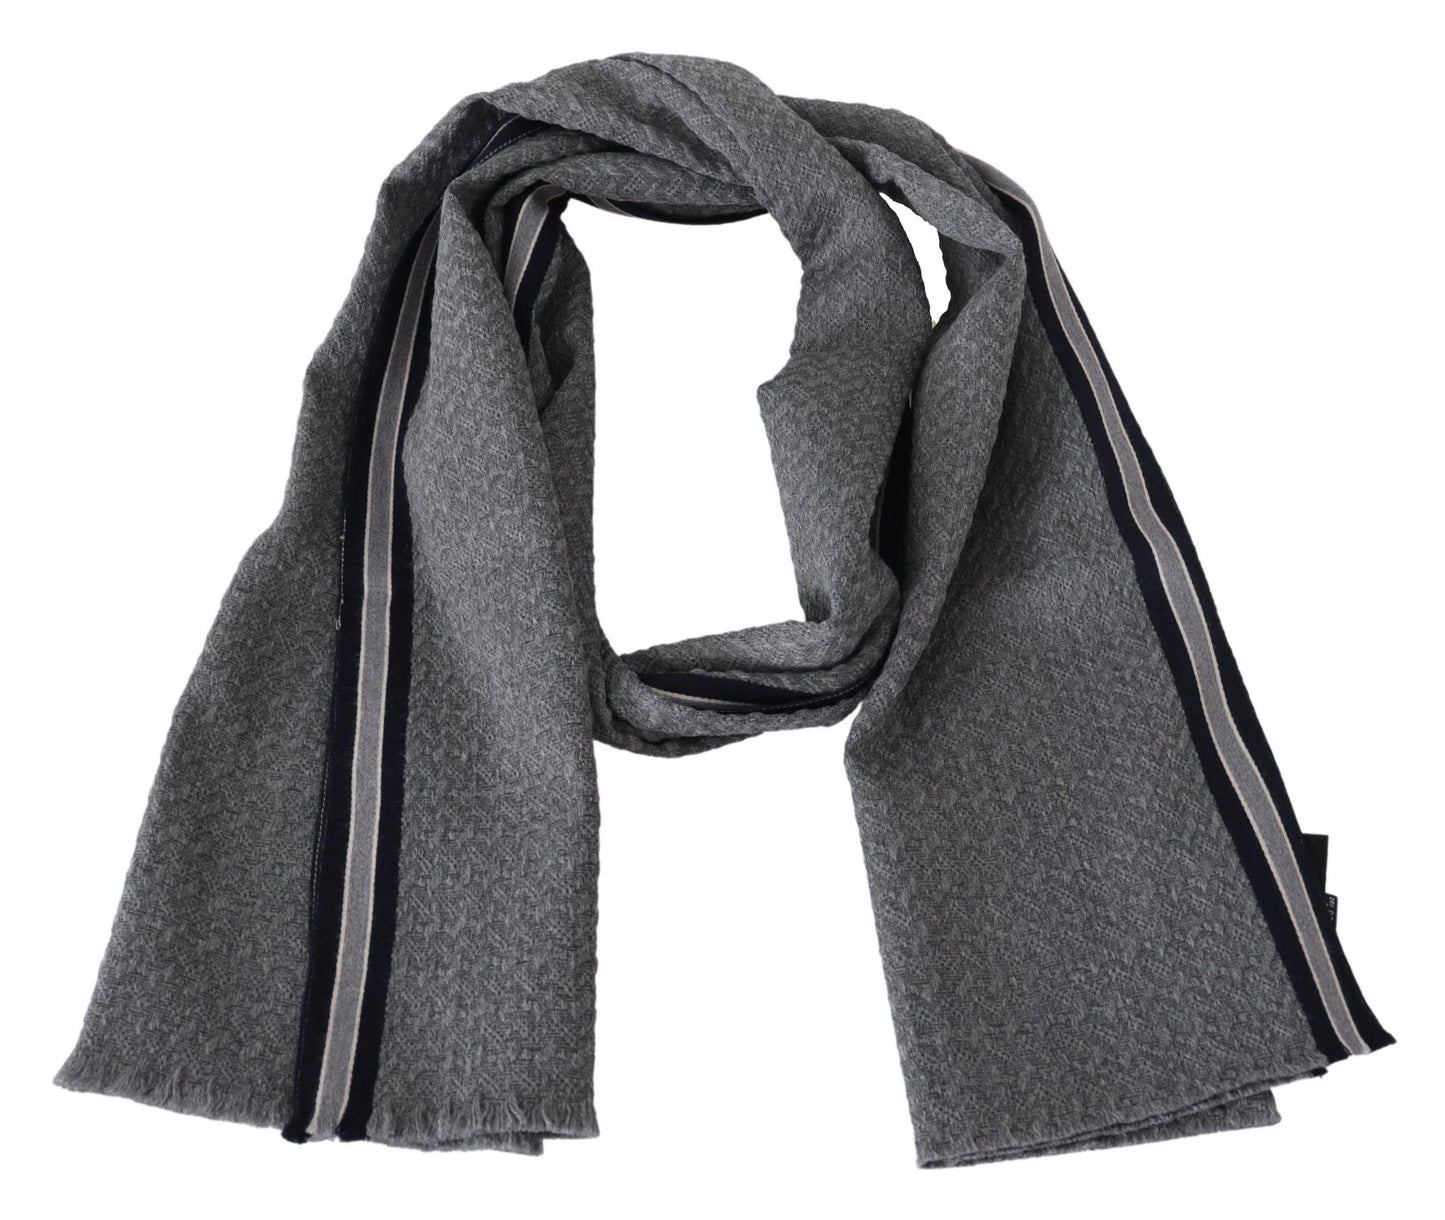 Elegant Gray Wool Scarf with Signature Stripes